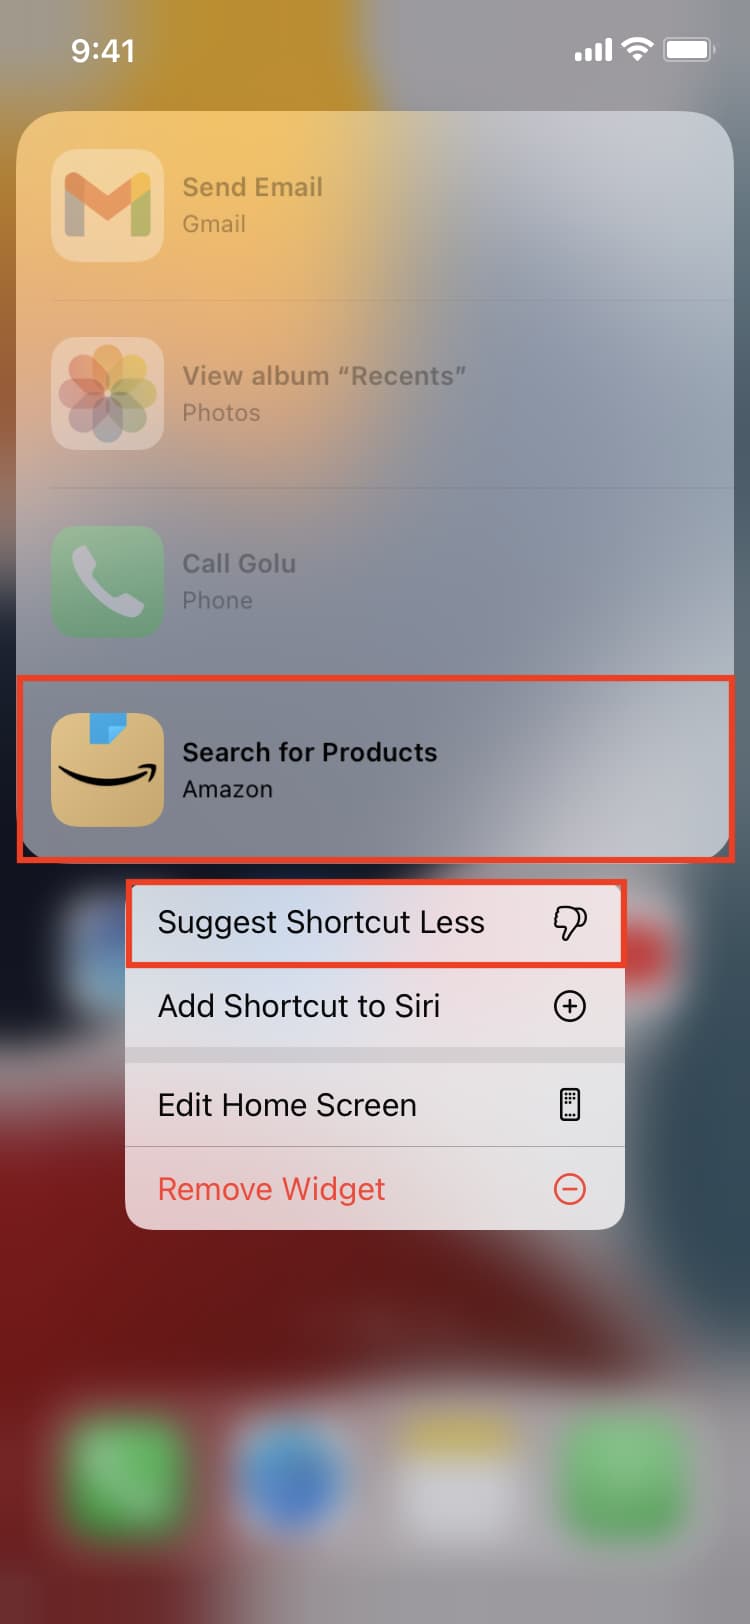 Remove a suggested shortcut from the iPhone Home Screen